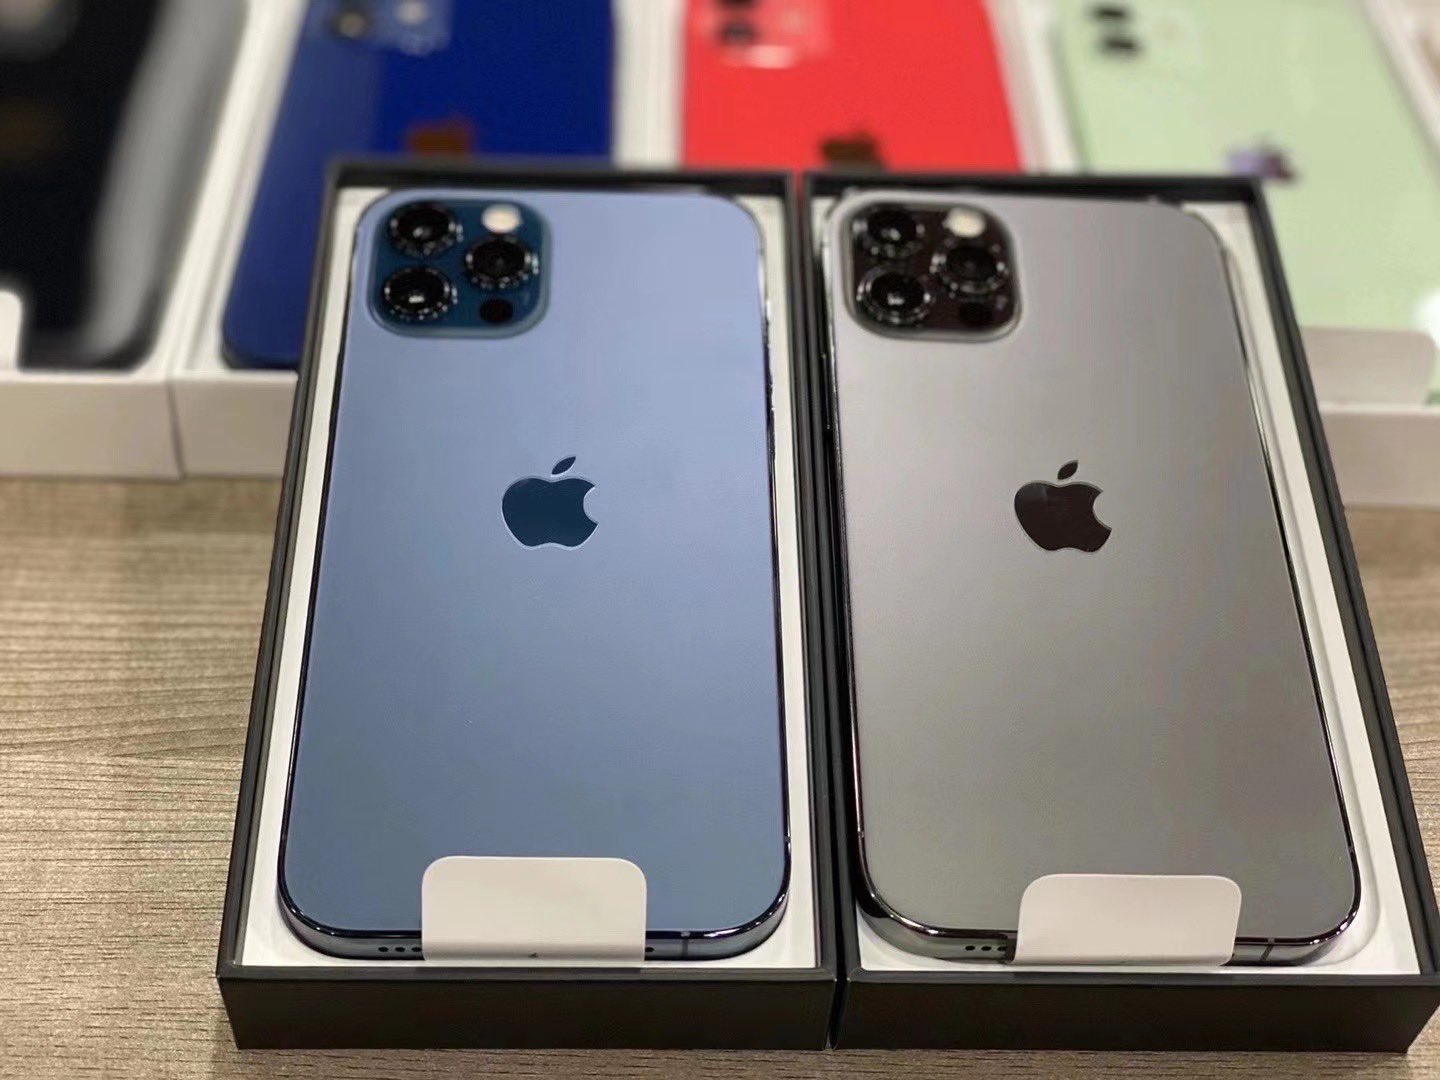 New Photos Offer Better Look at iPhone 12 Color Options | MacRumors Forums